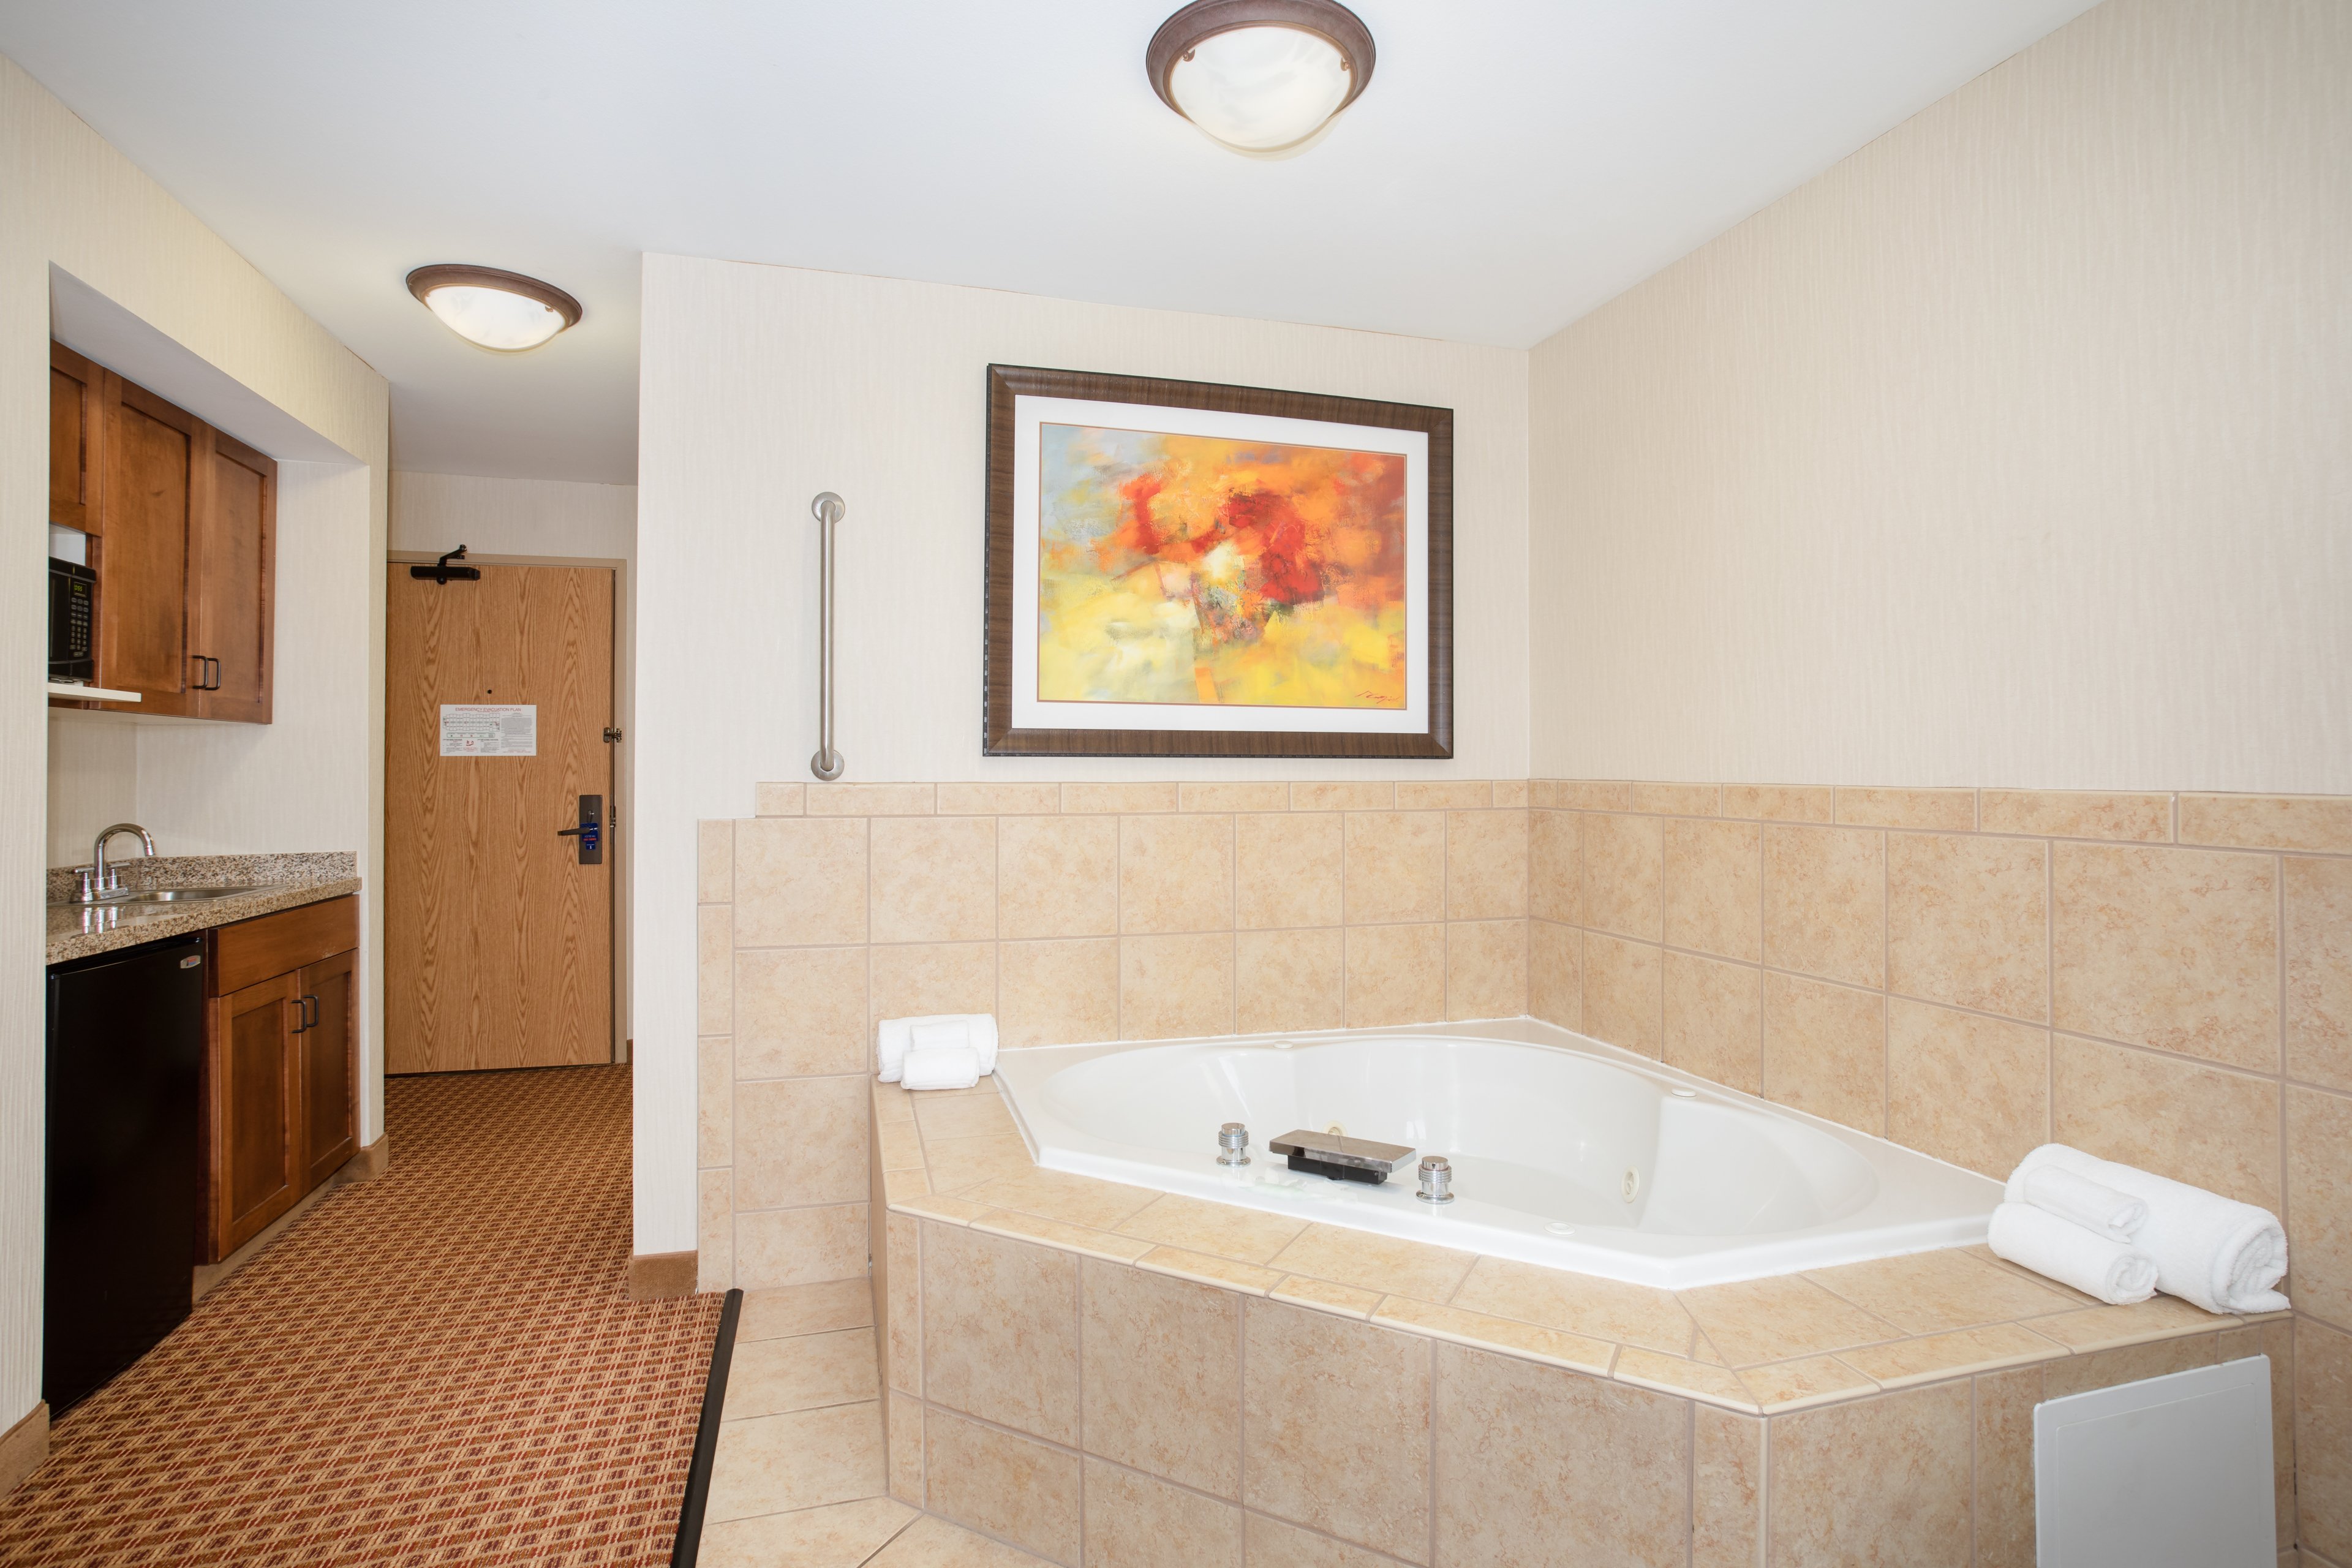 Relax after a long day with a hot whirlpool bath Gillette Wyoming